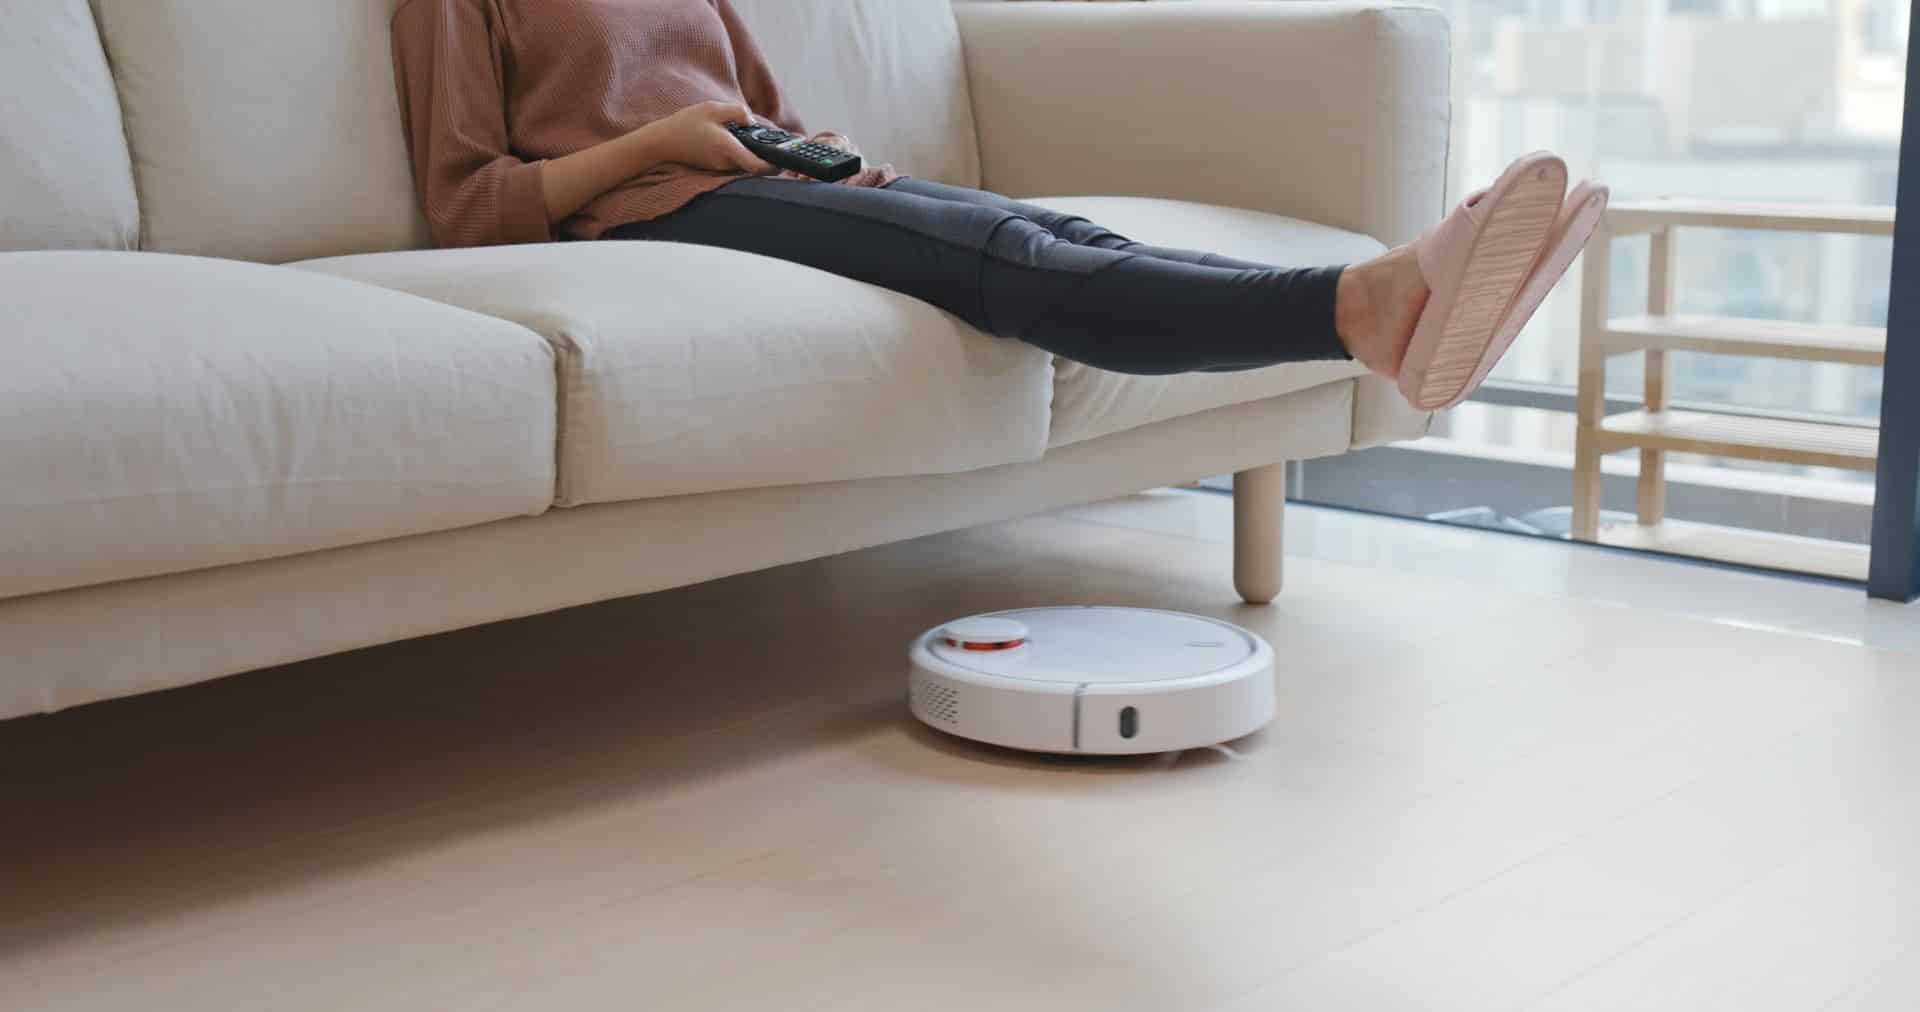 woman watching TV with her feet up while a robotic vacuum runs